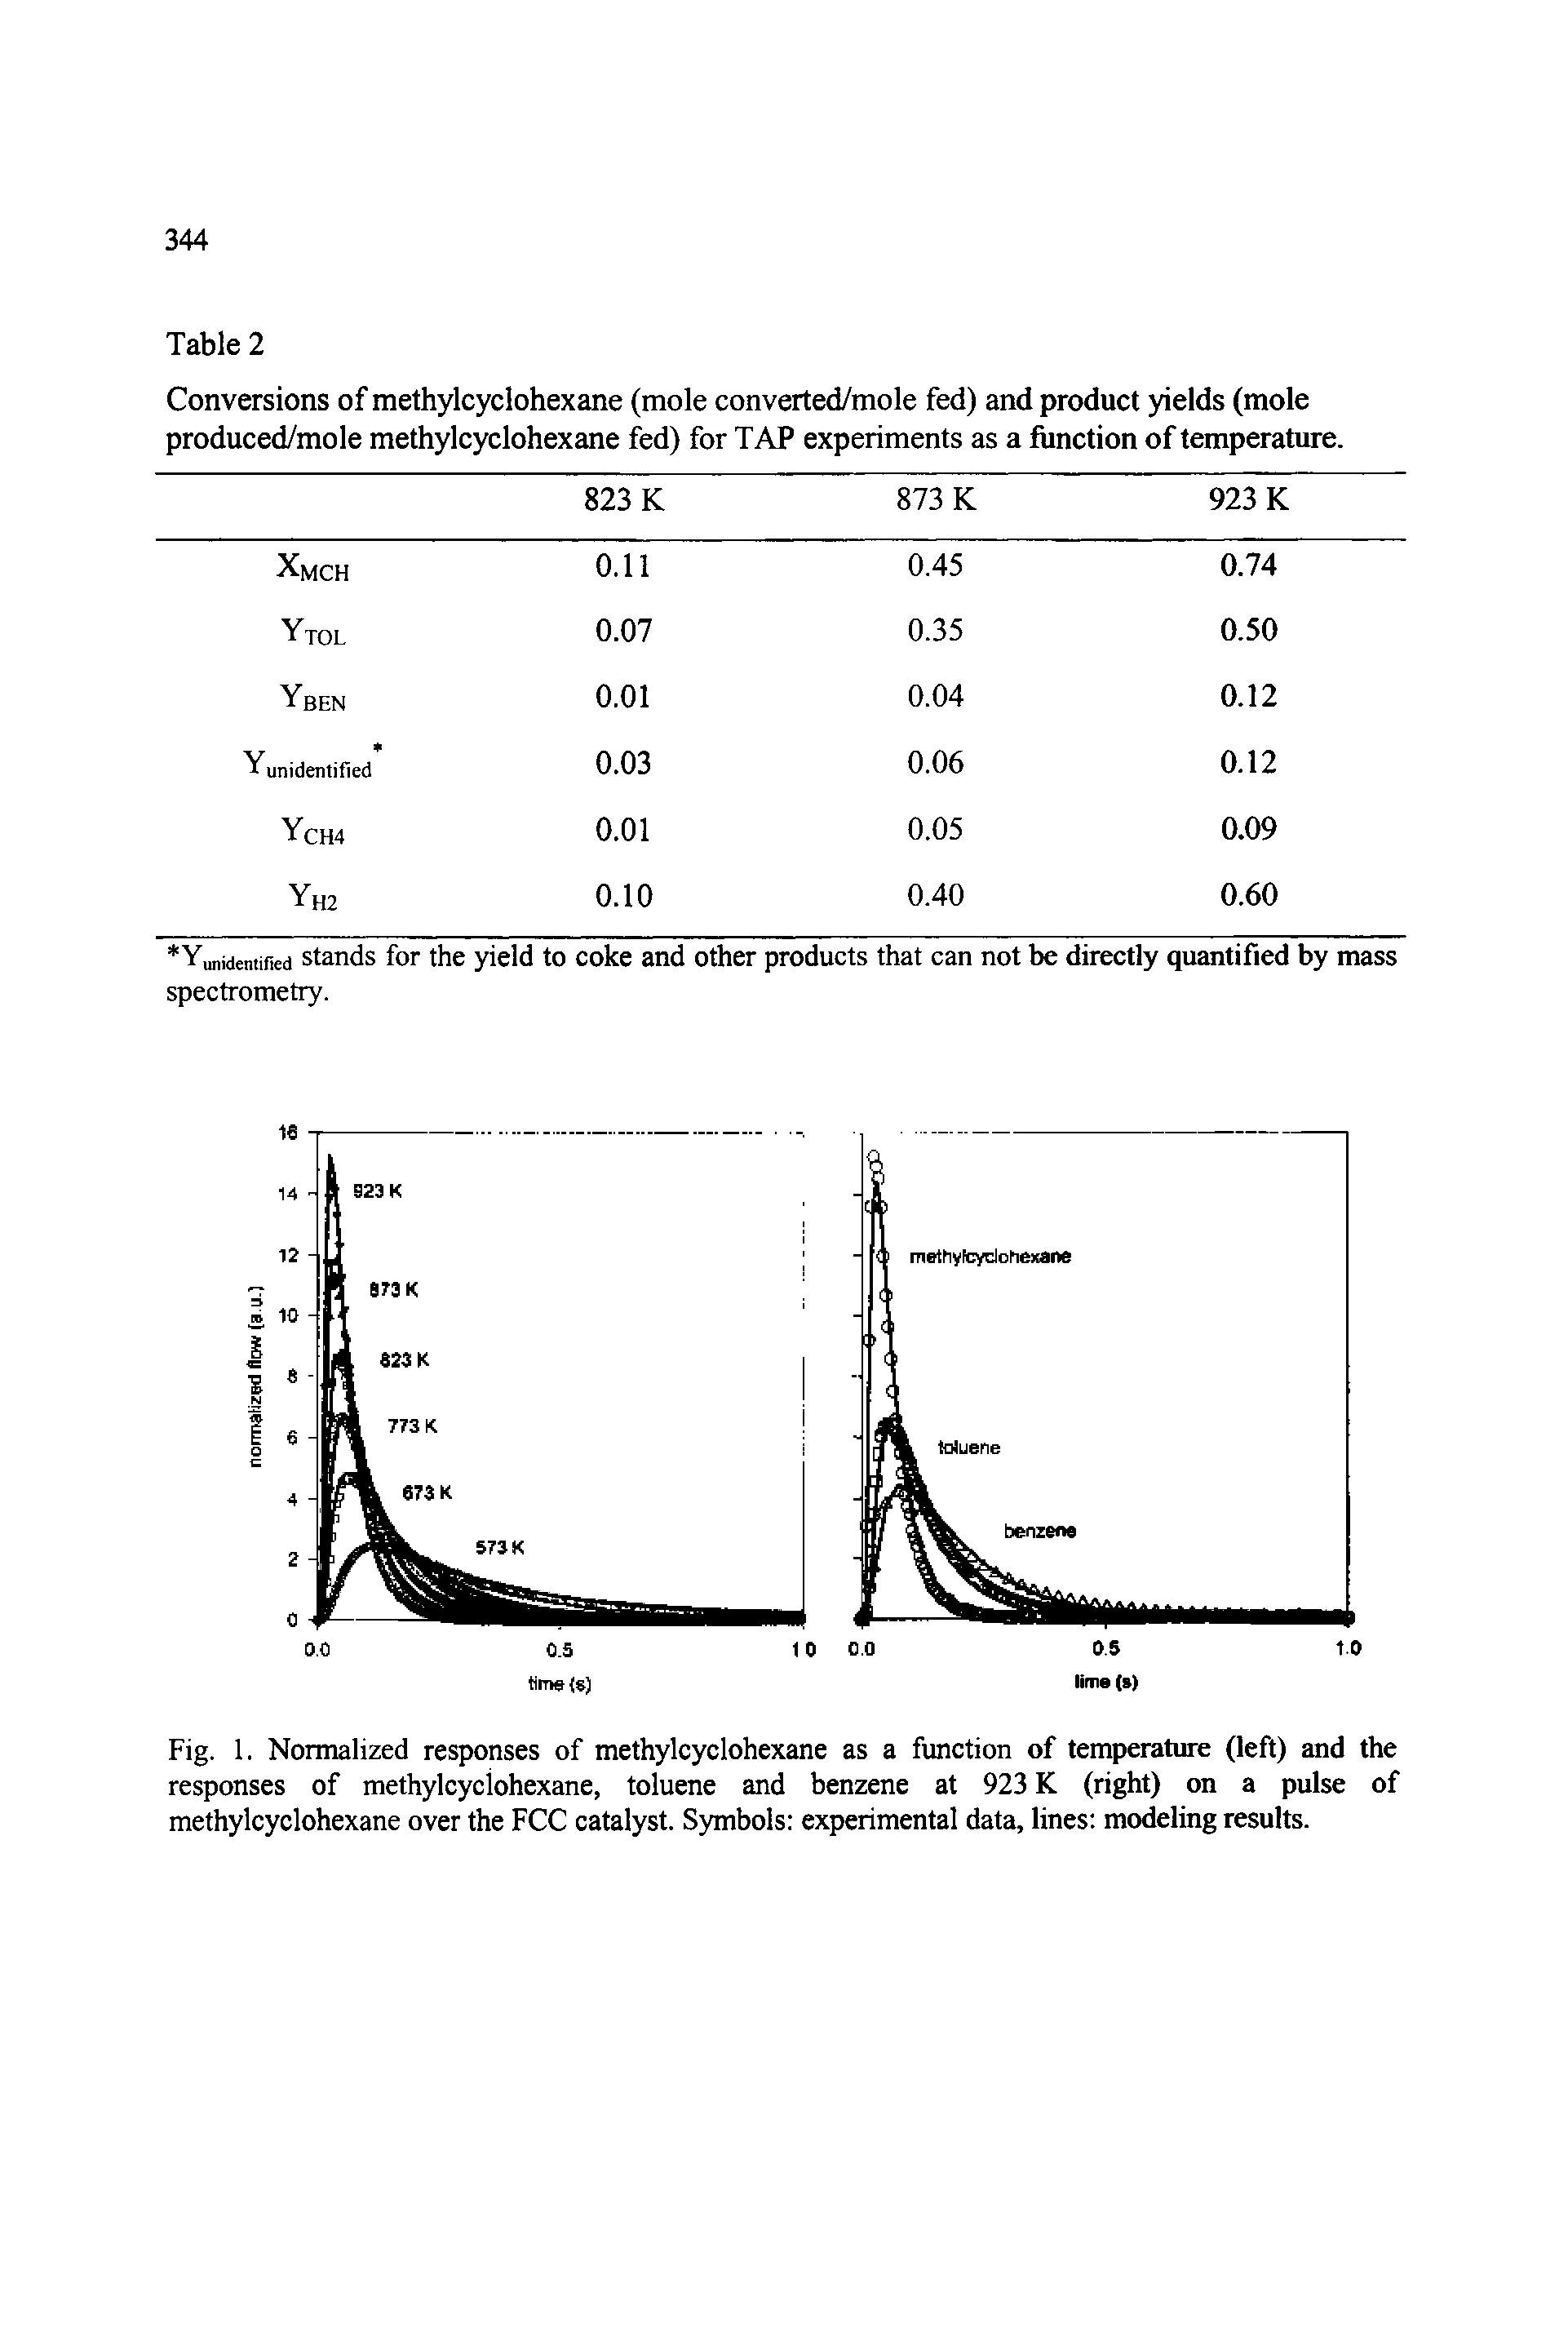 Fig. 1. Normalized responses of methylcyclohexane as a function of temperature (left) and the responses of methylcyclohexane, toluene and benzene at 923 K (right) on a pulse of methylcyclohexane over the FCC catalyst. S)nnbols experimental data, lines modeling results.